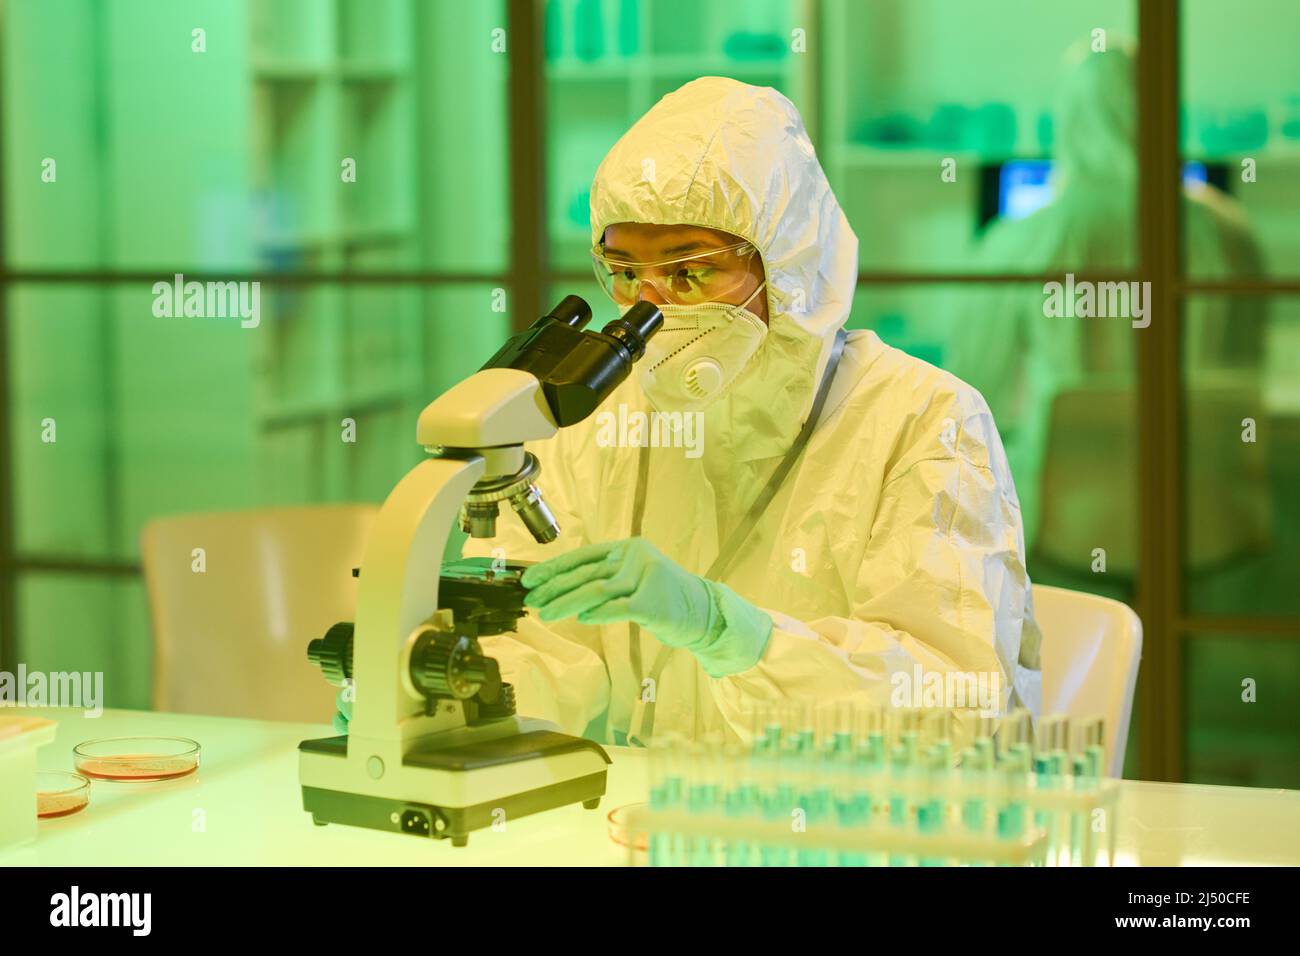 Young female scientist in protective biohazard suit, respirator, gloves and eyeglasses looking in microscope while studying new virus or bacteria Stock Photo